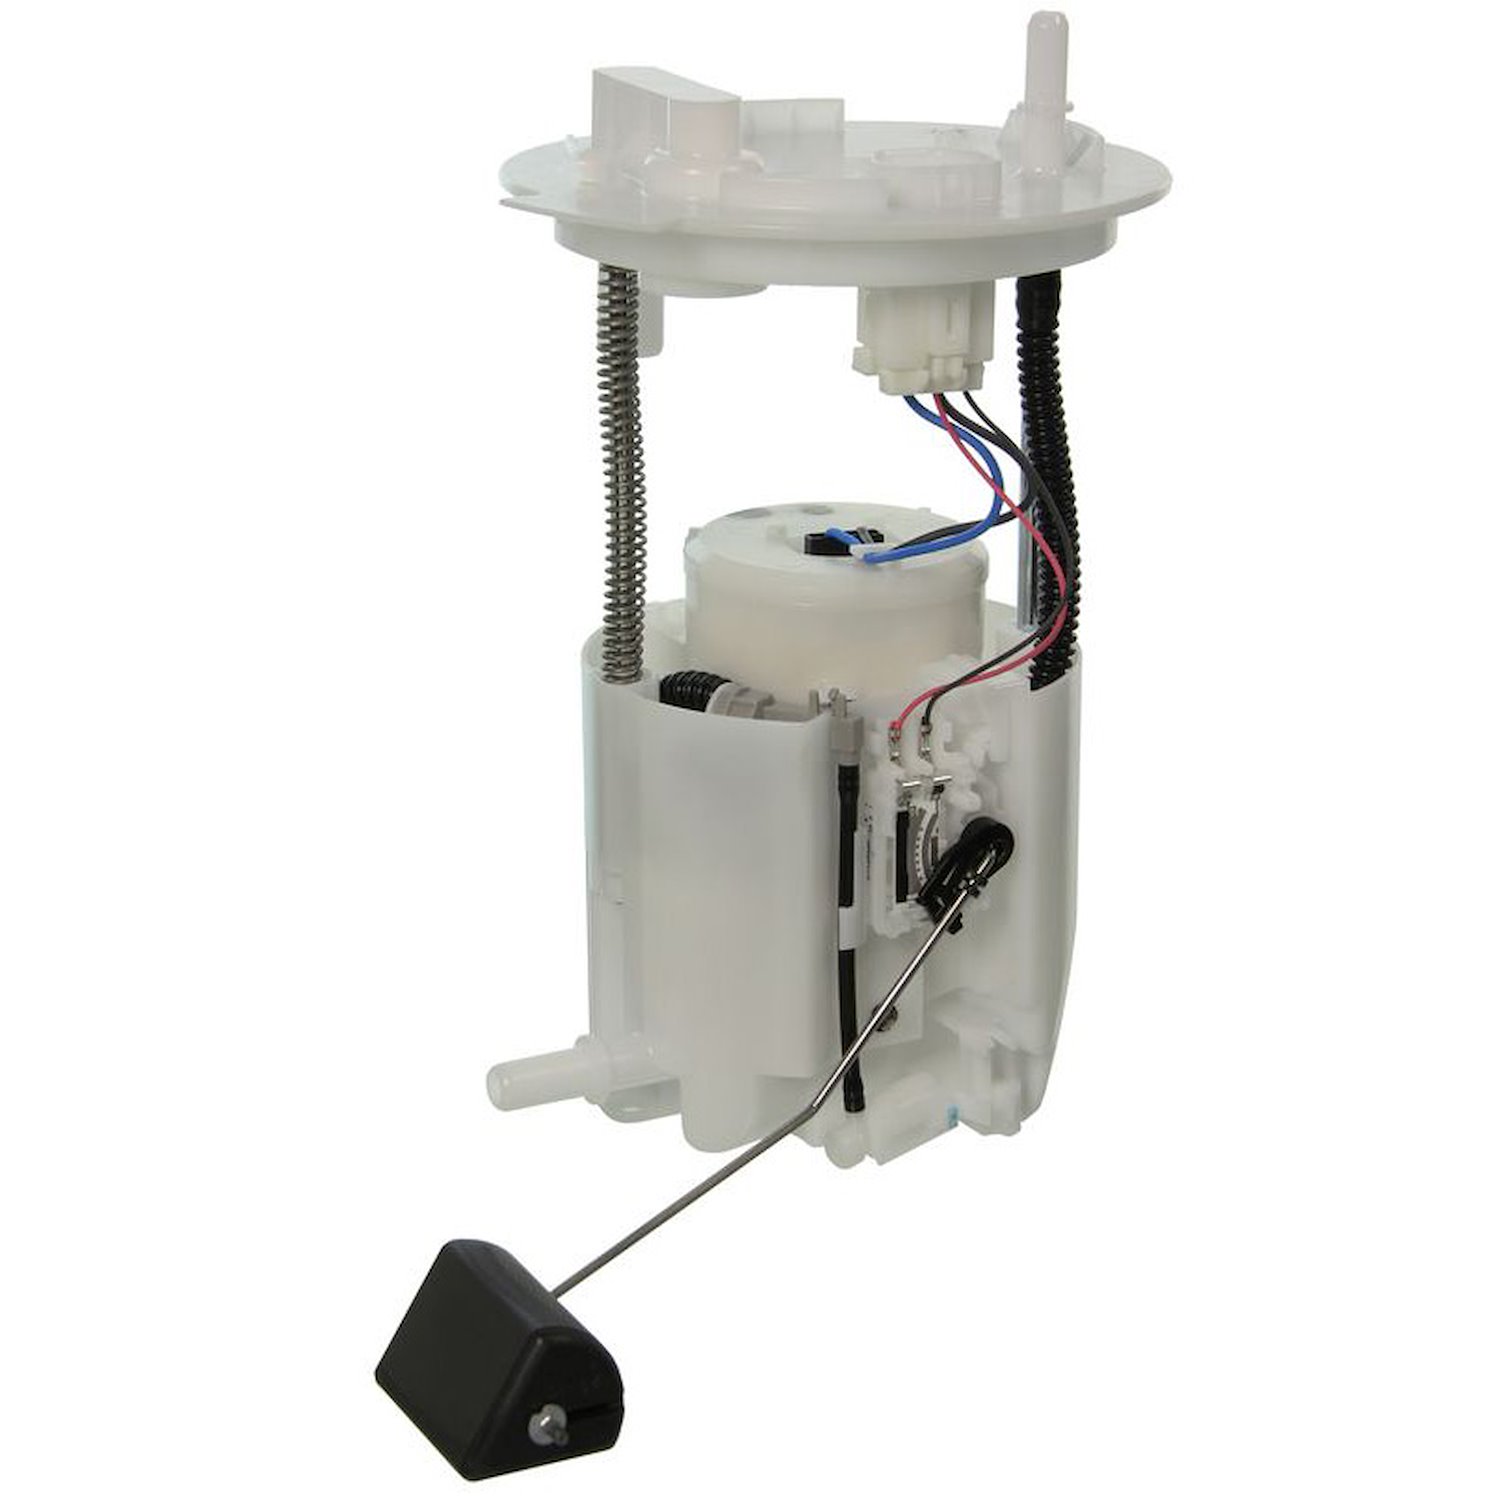 OE Ford/Lincoln Fuel Pump Module Assembly for 2010-2012 Ford Taurus/Lincoln MKS